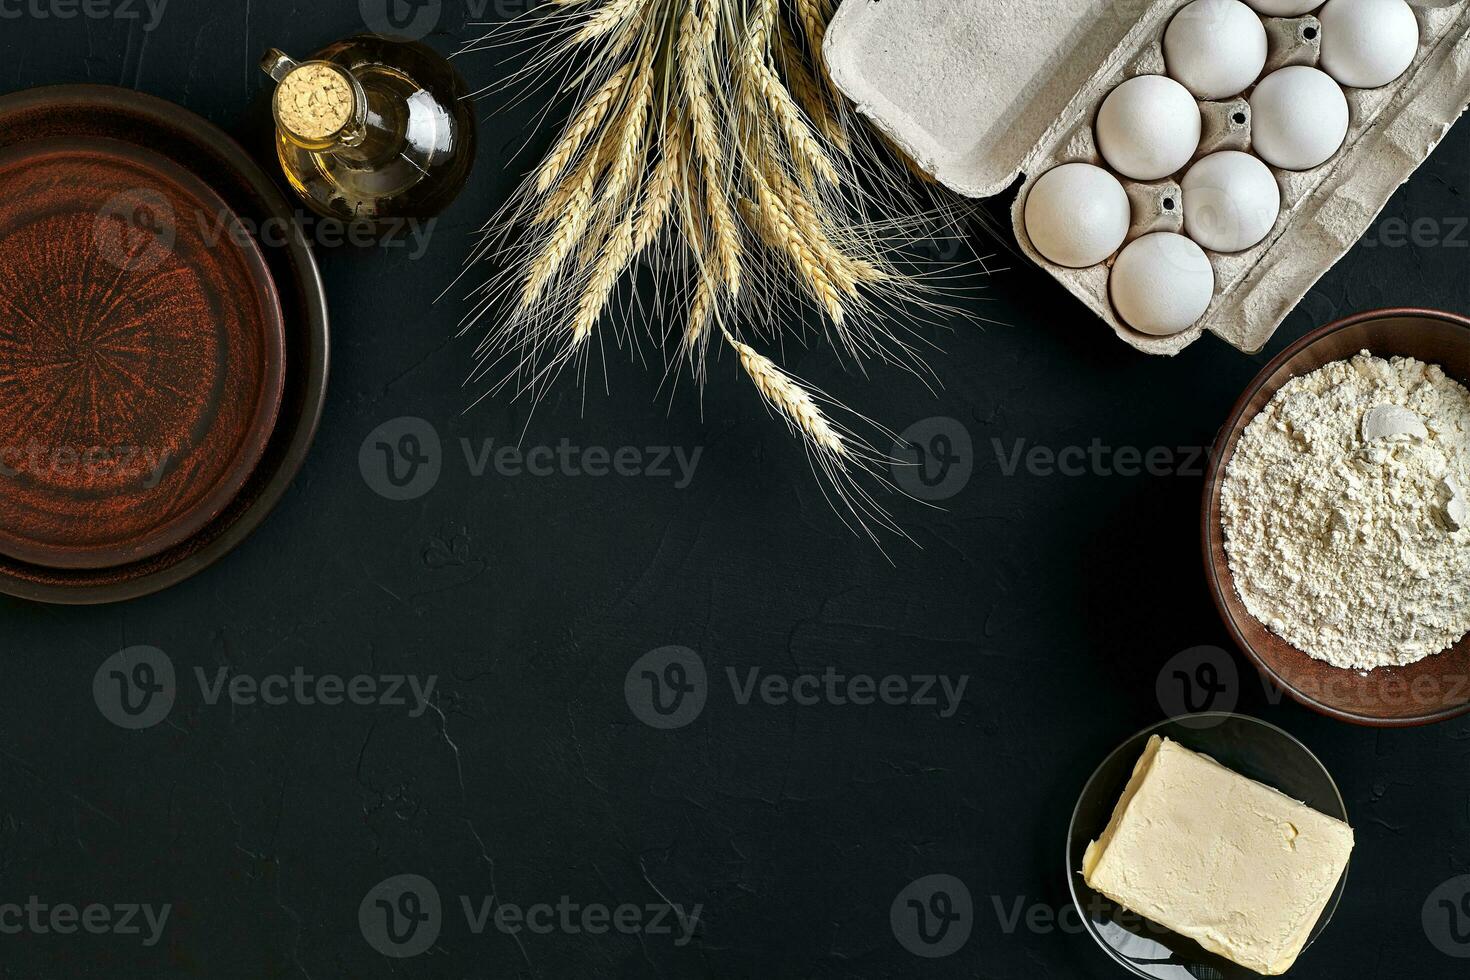 Dough preparation recipe bread, pizza or pie making ingredients, food flat lay on kitchen table background. Working with butter, yeast, flour, eggs, oil. Pastry or bakery cooking. photo